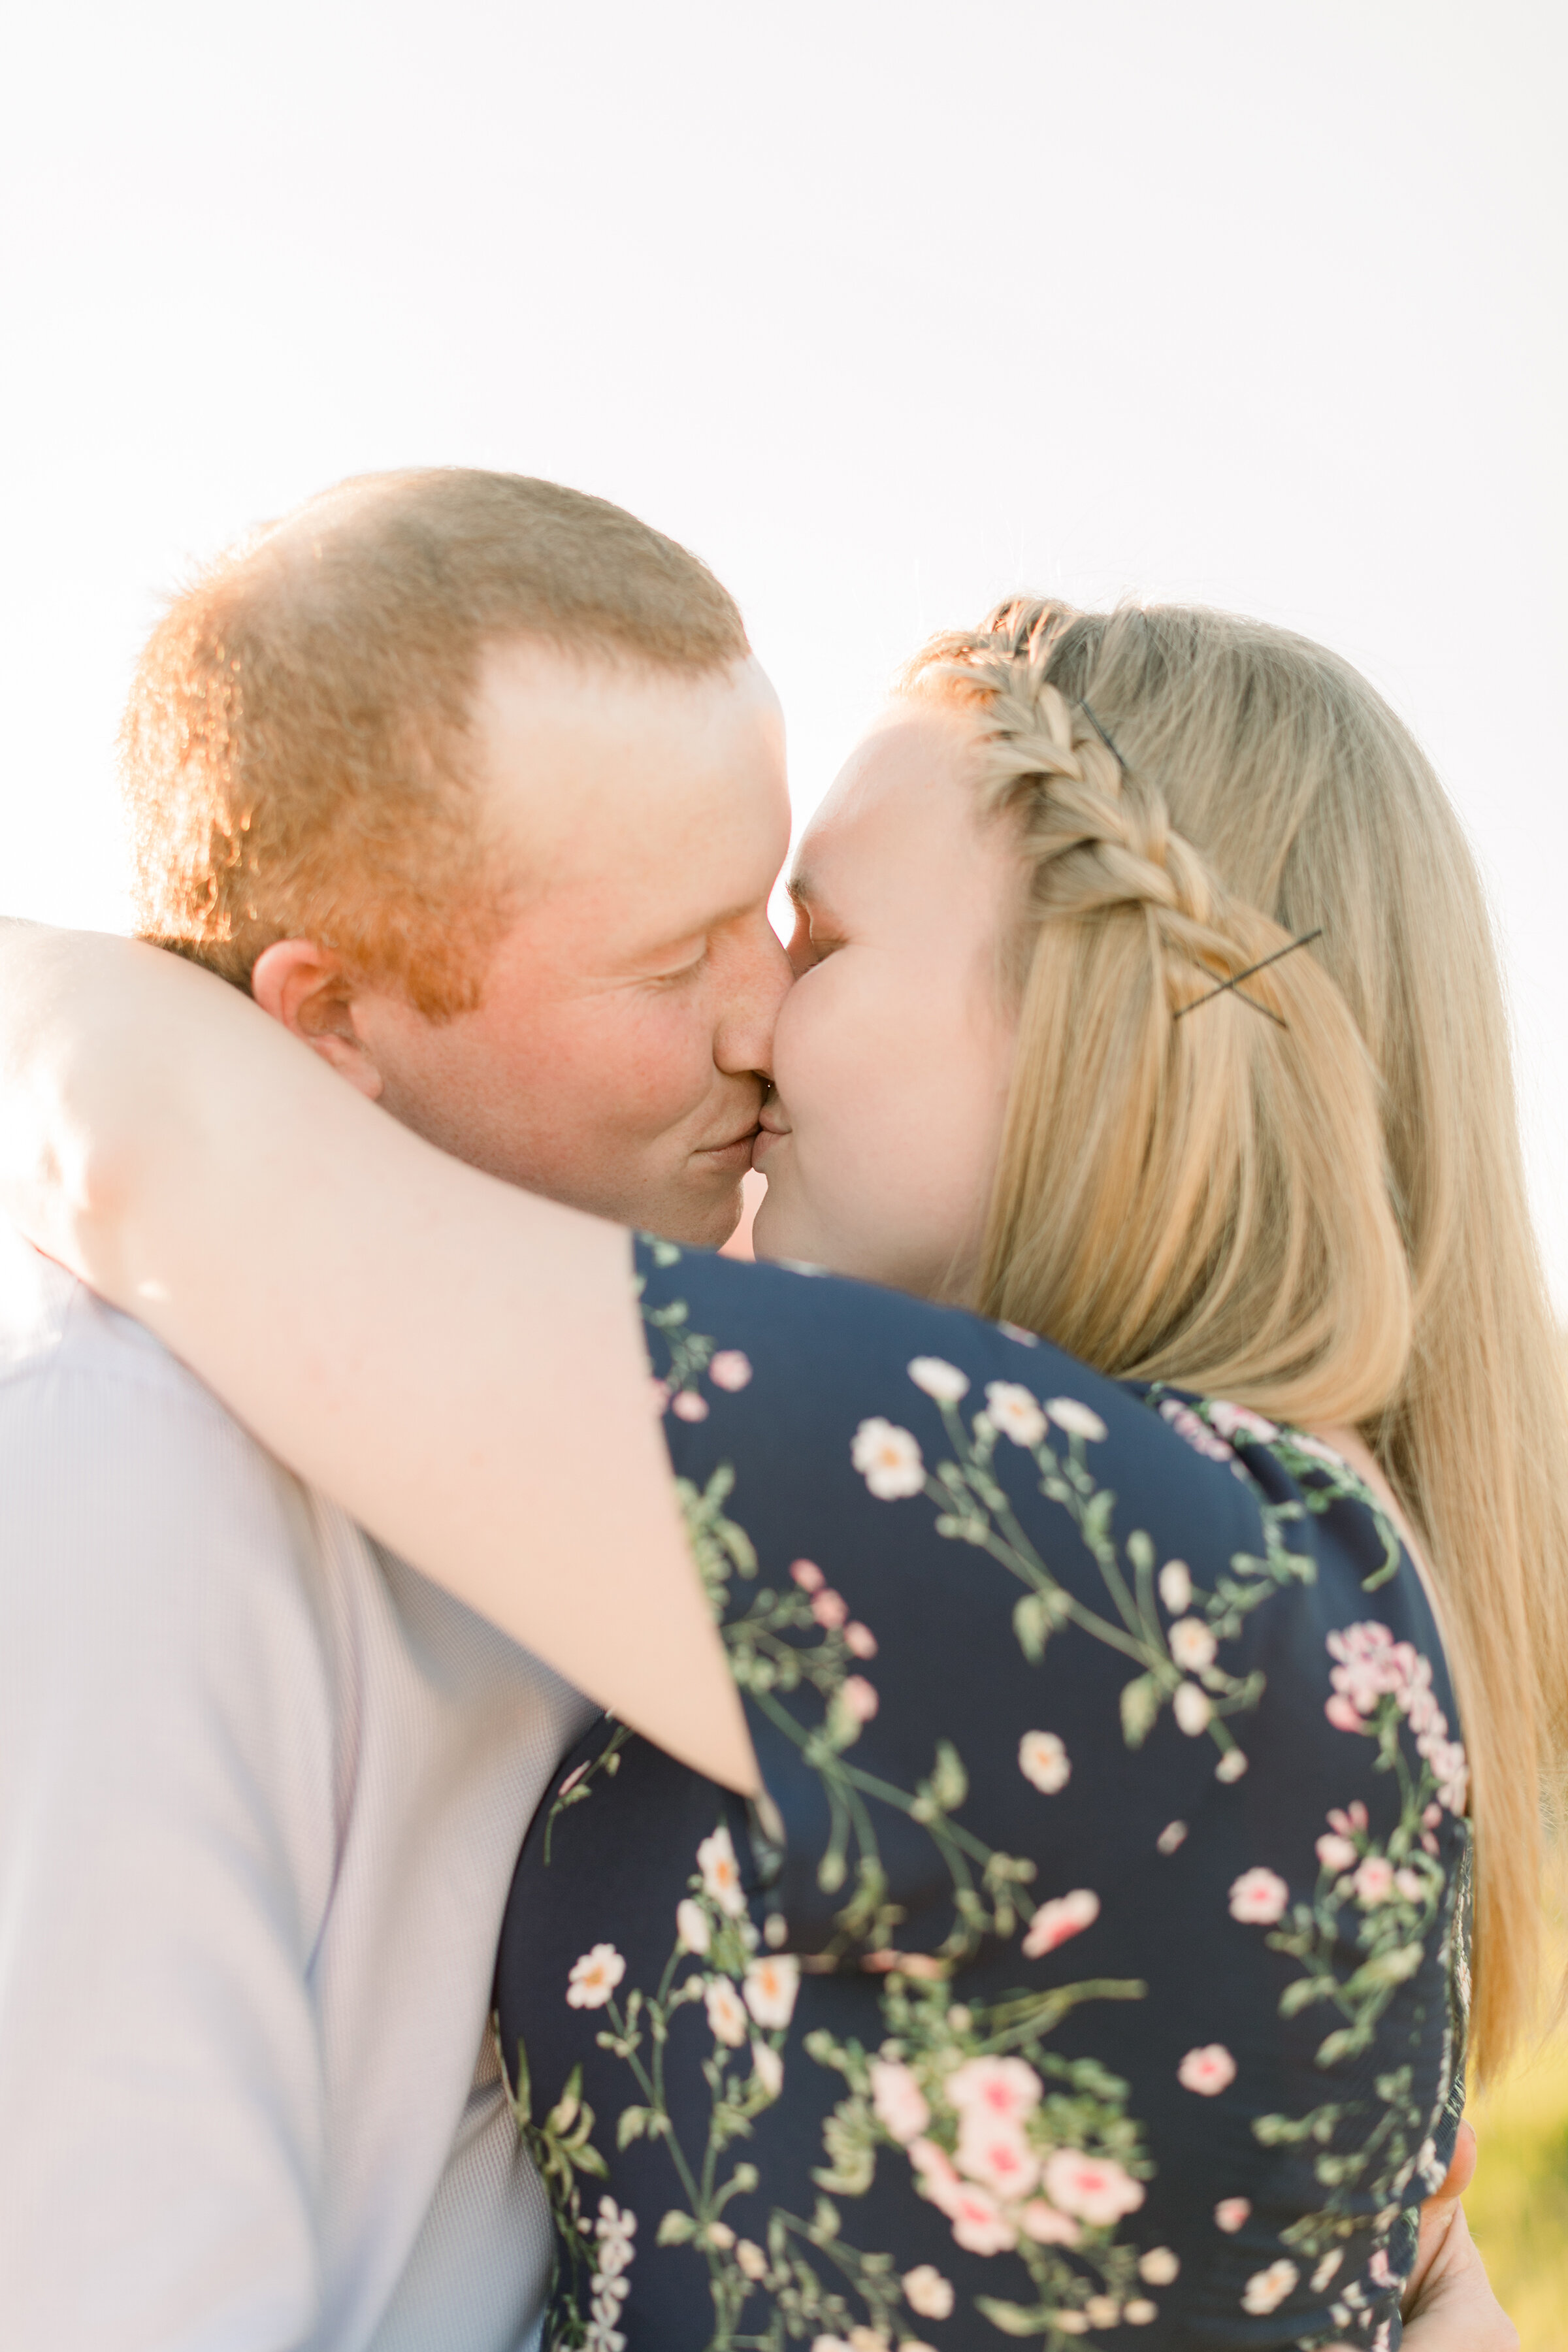  A glowing couple kiss each other in a warm and bright engagement session by Chelsea Mason Photography. Engagement session pose inspiration ideas and goals couple goals engagement session goals professional photographer client attire inspiration semi